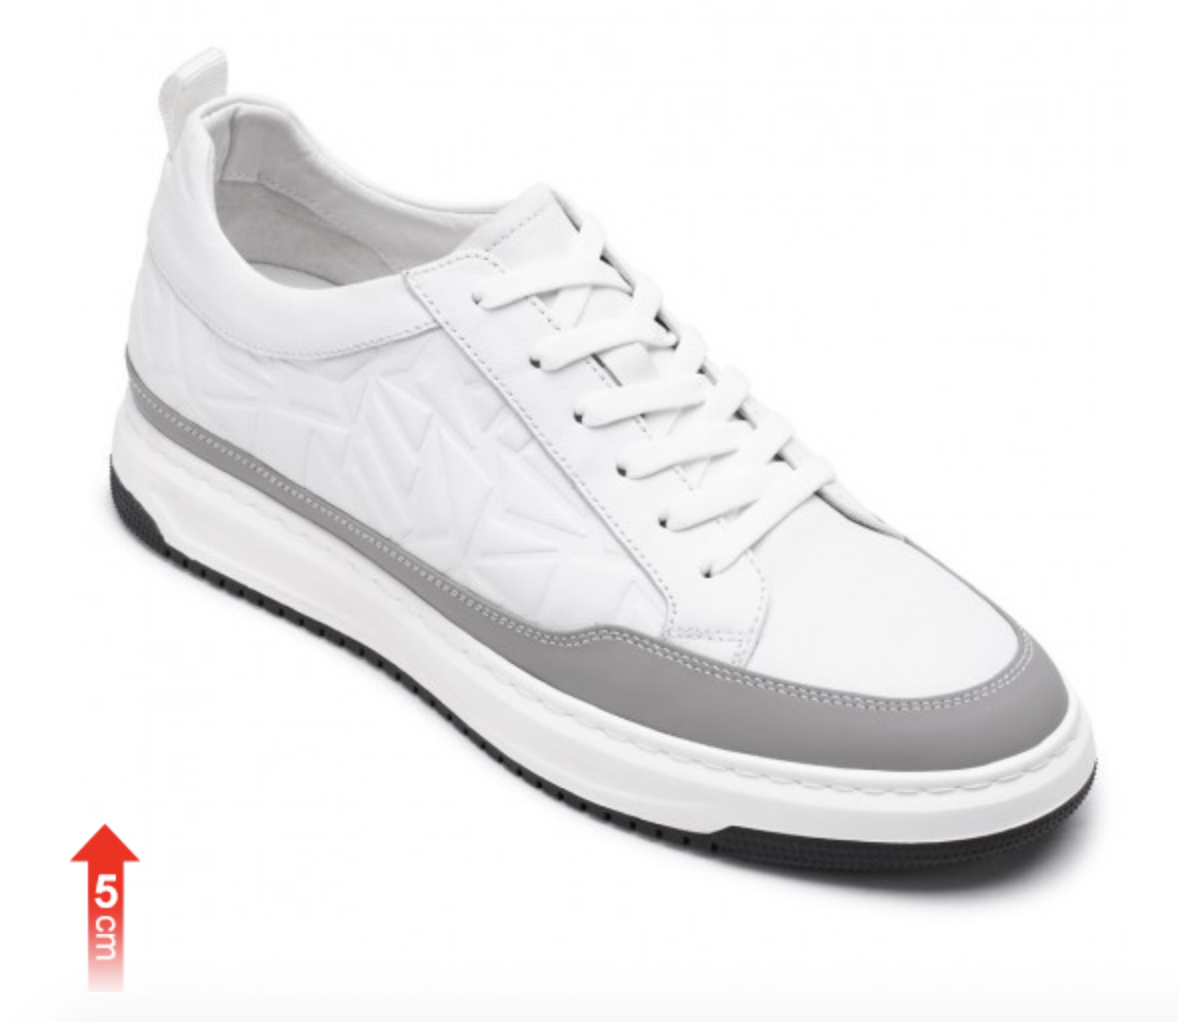 Aggregate 243+ elevator shoes sneakers super hot